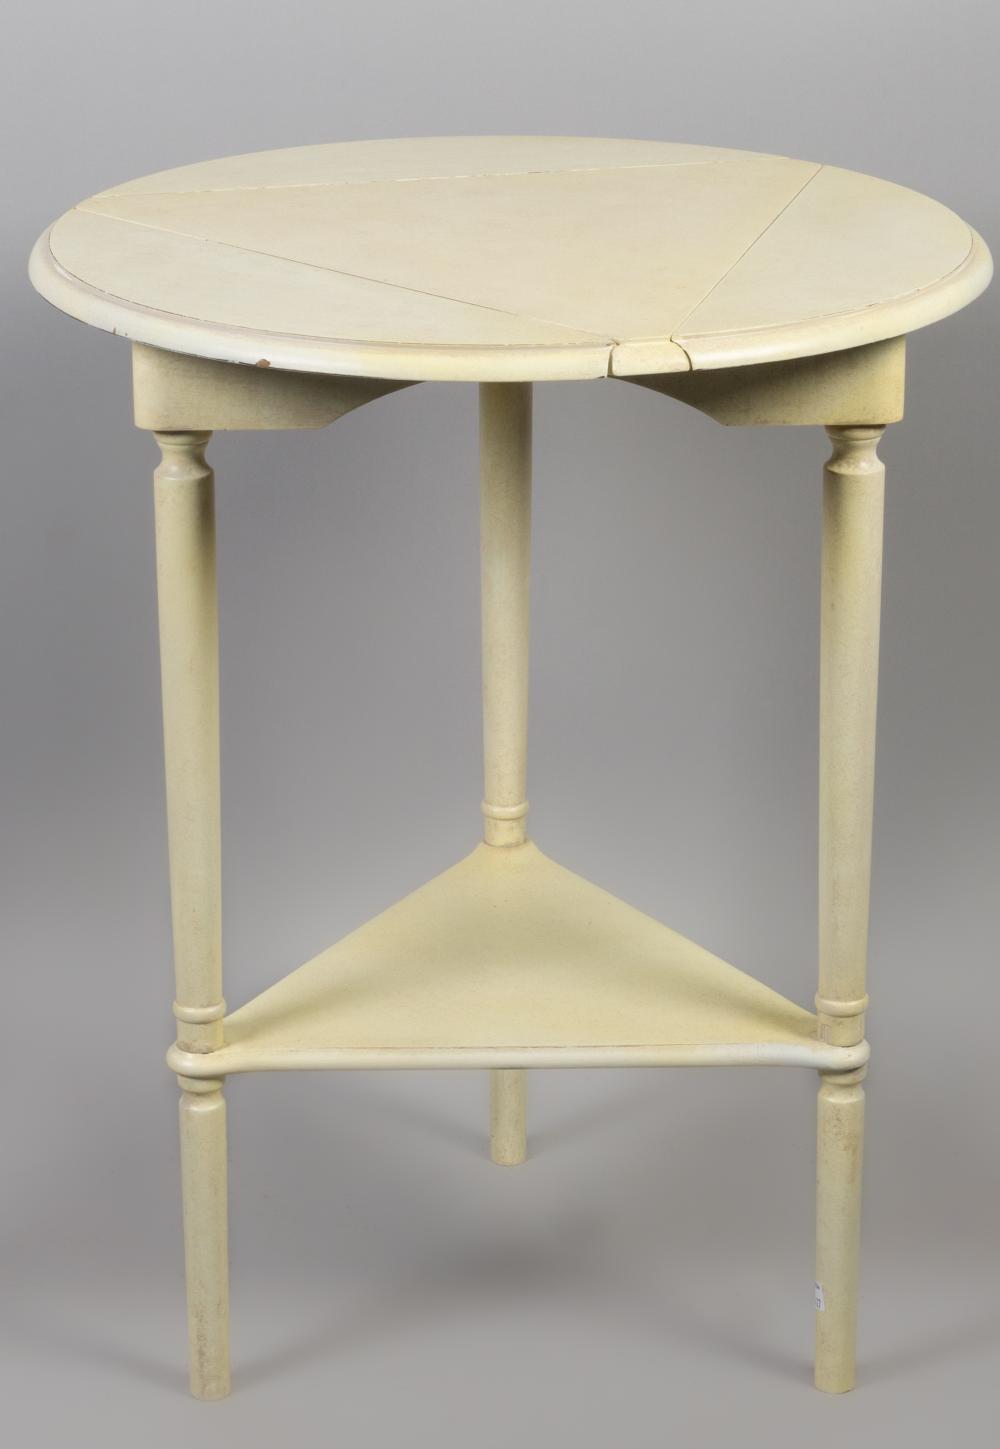 CLASSICAL STYLE CREAM PAINTED DROP-LEAF